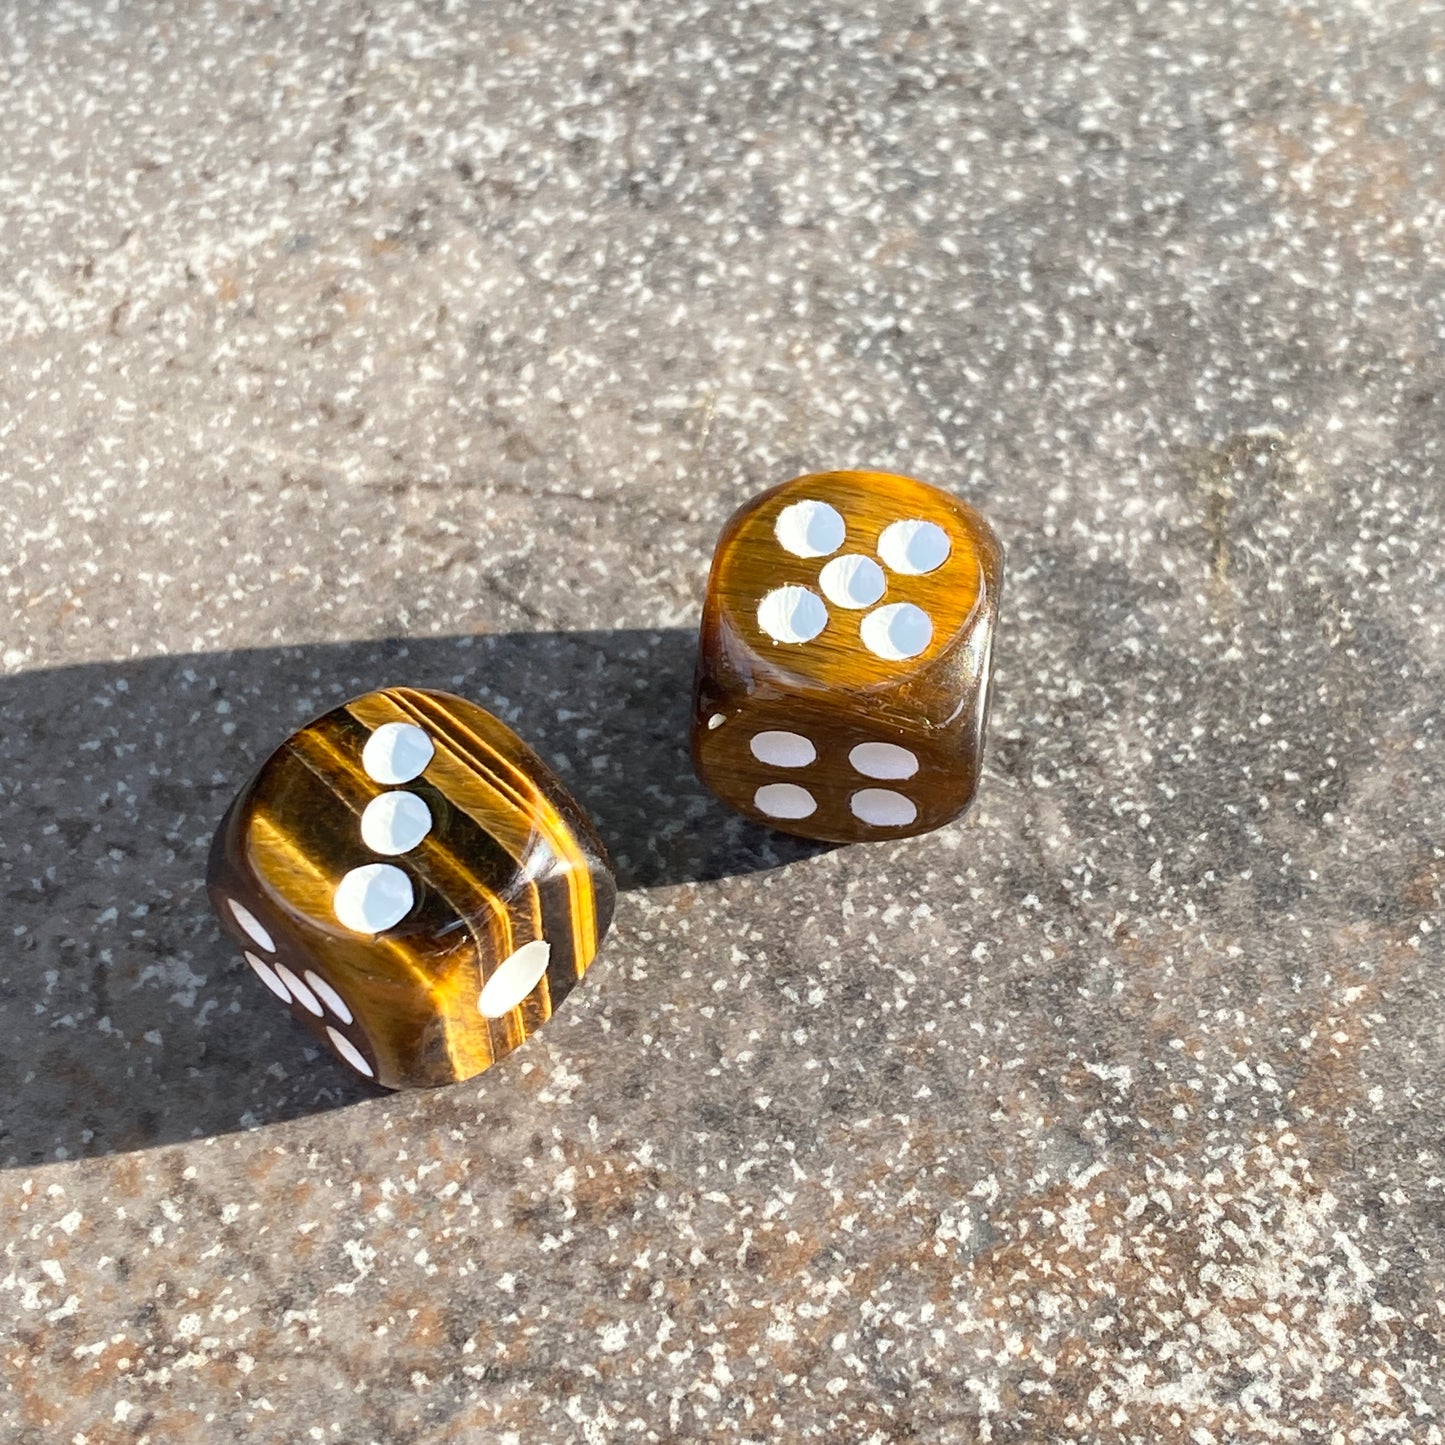 Gemstone Carved Playing Dice